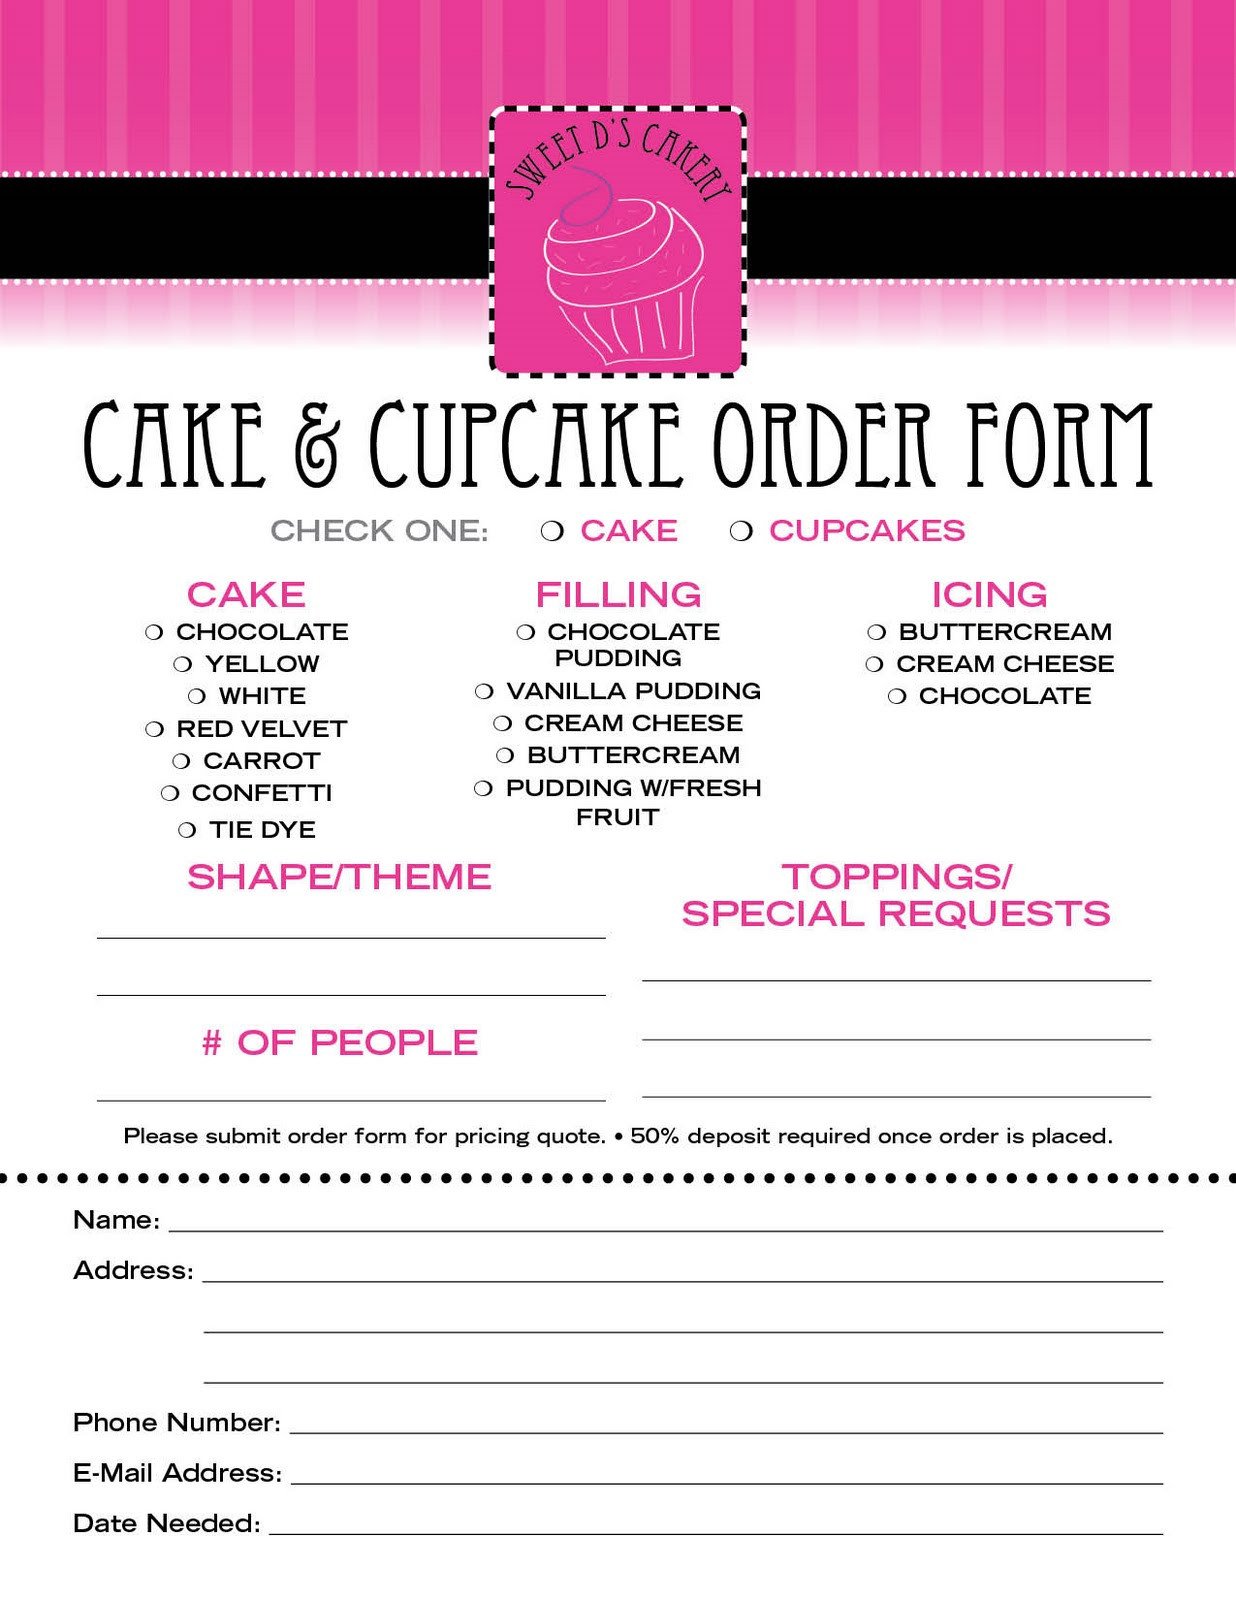 Cake order forms Templates Sweet D S Cakery Download Our order form Here